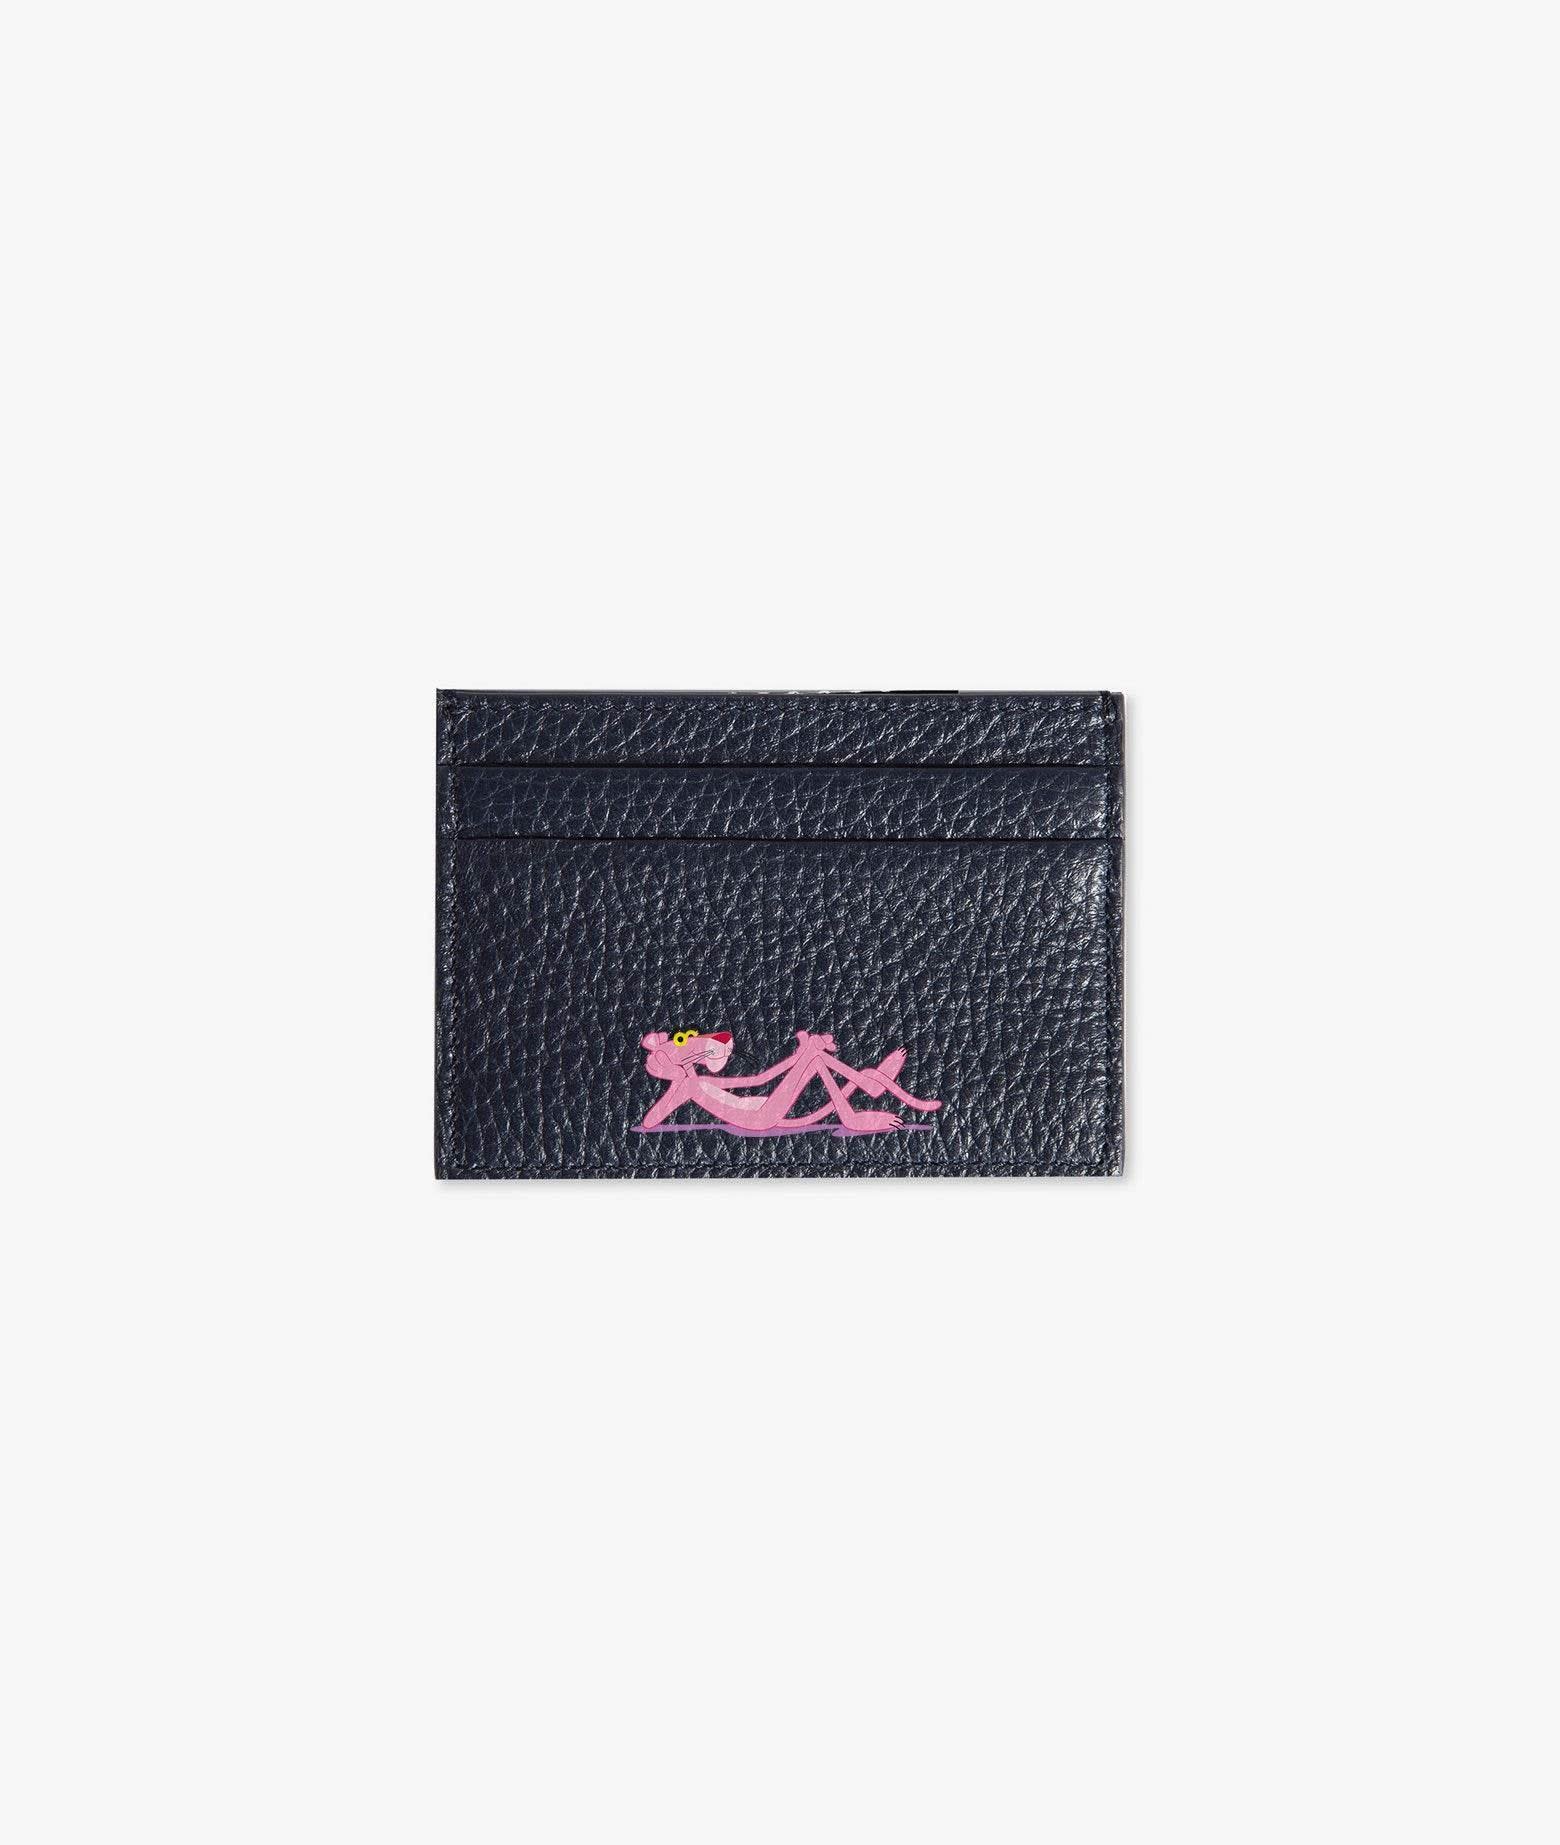 Larusmiani Card Holder Pink Panther Wallet In Navy